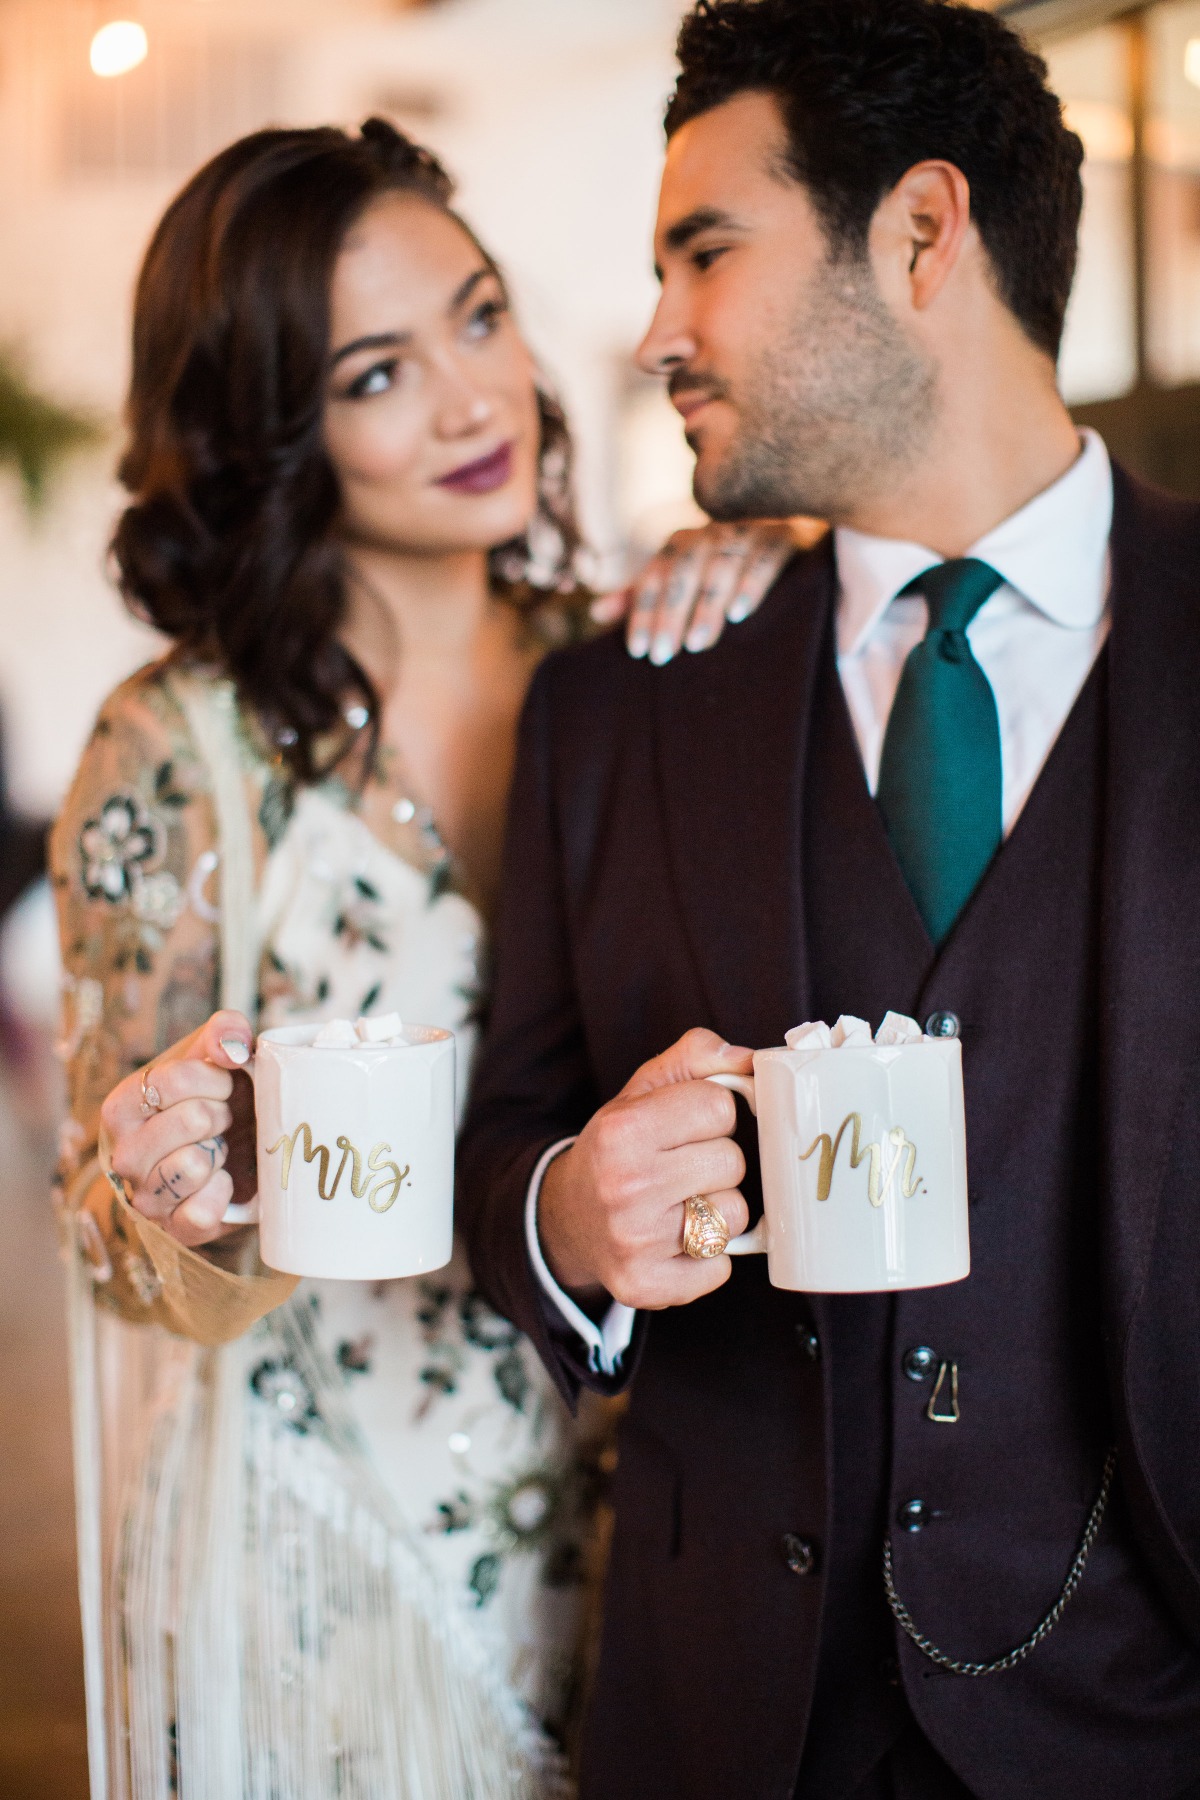 Mr and Mrs coffee cups for hot cocoa